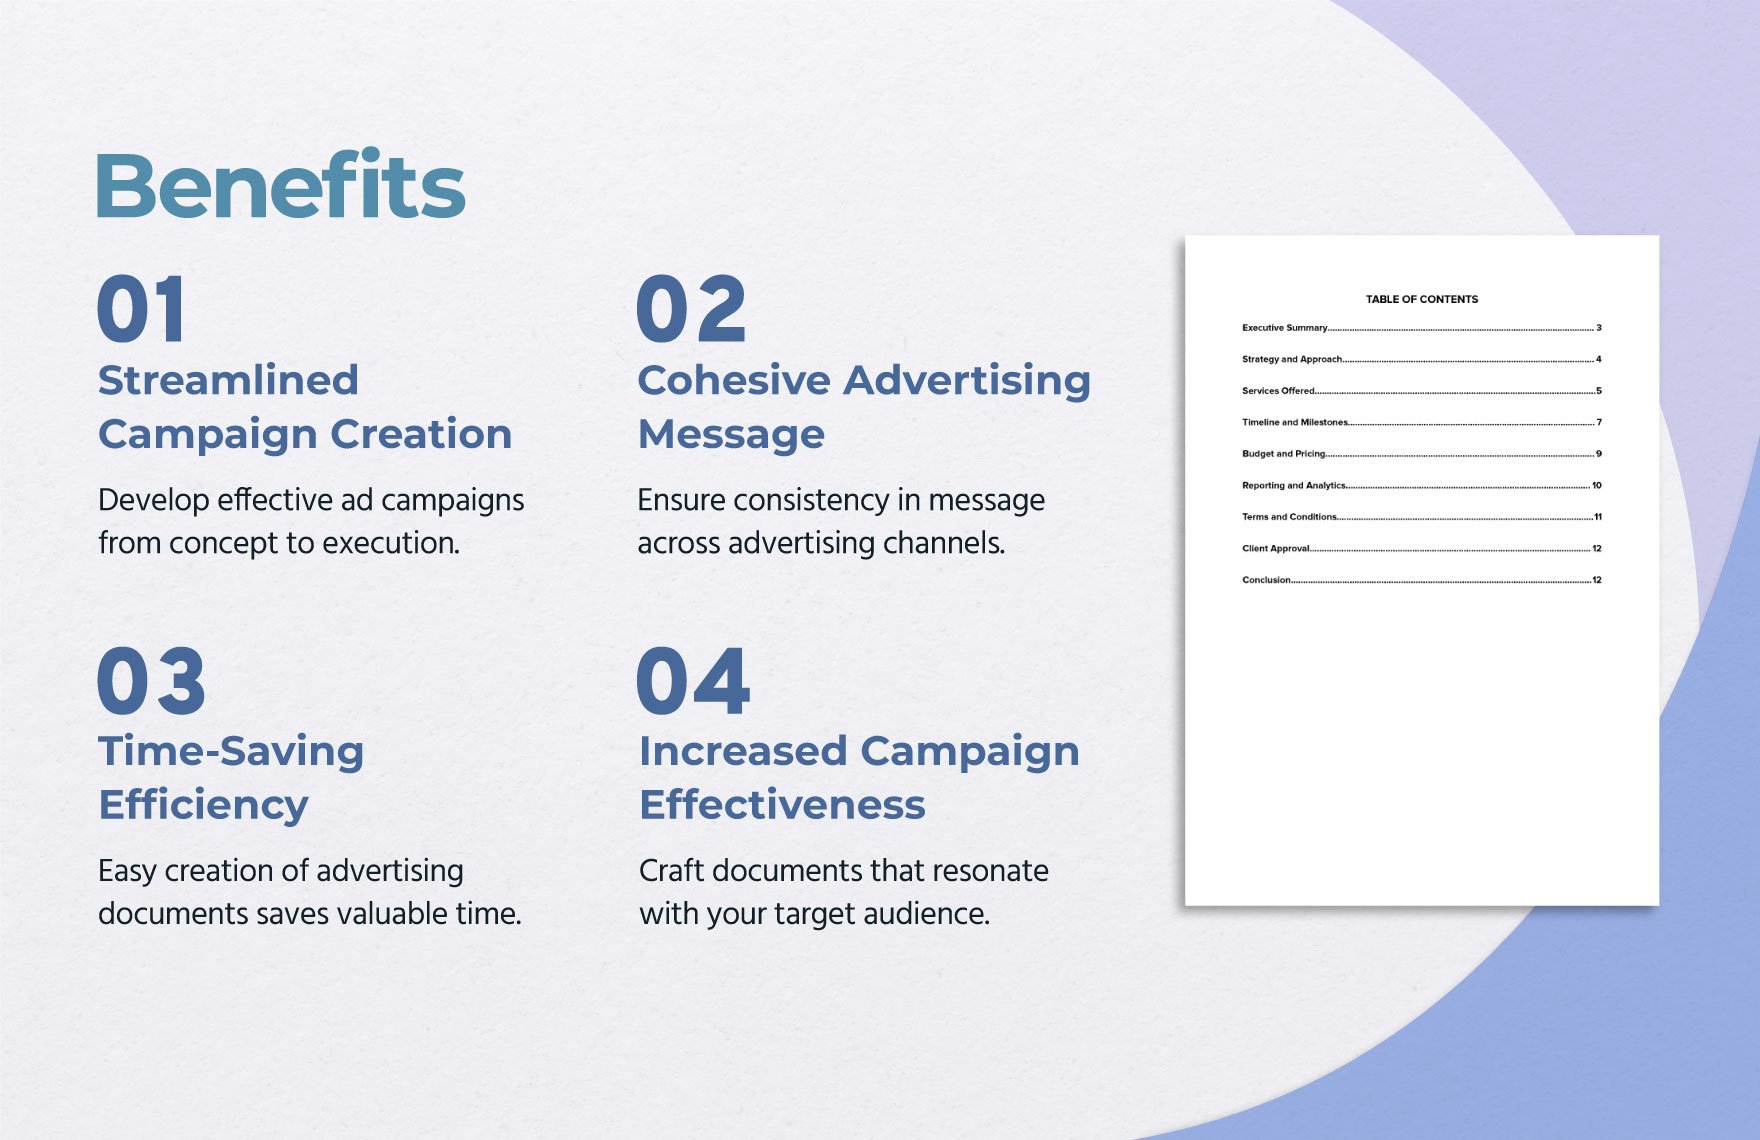 Detailed Proposal for Digital Marketing Advertising Services Template